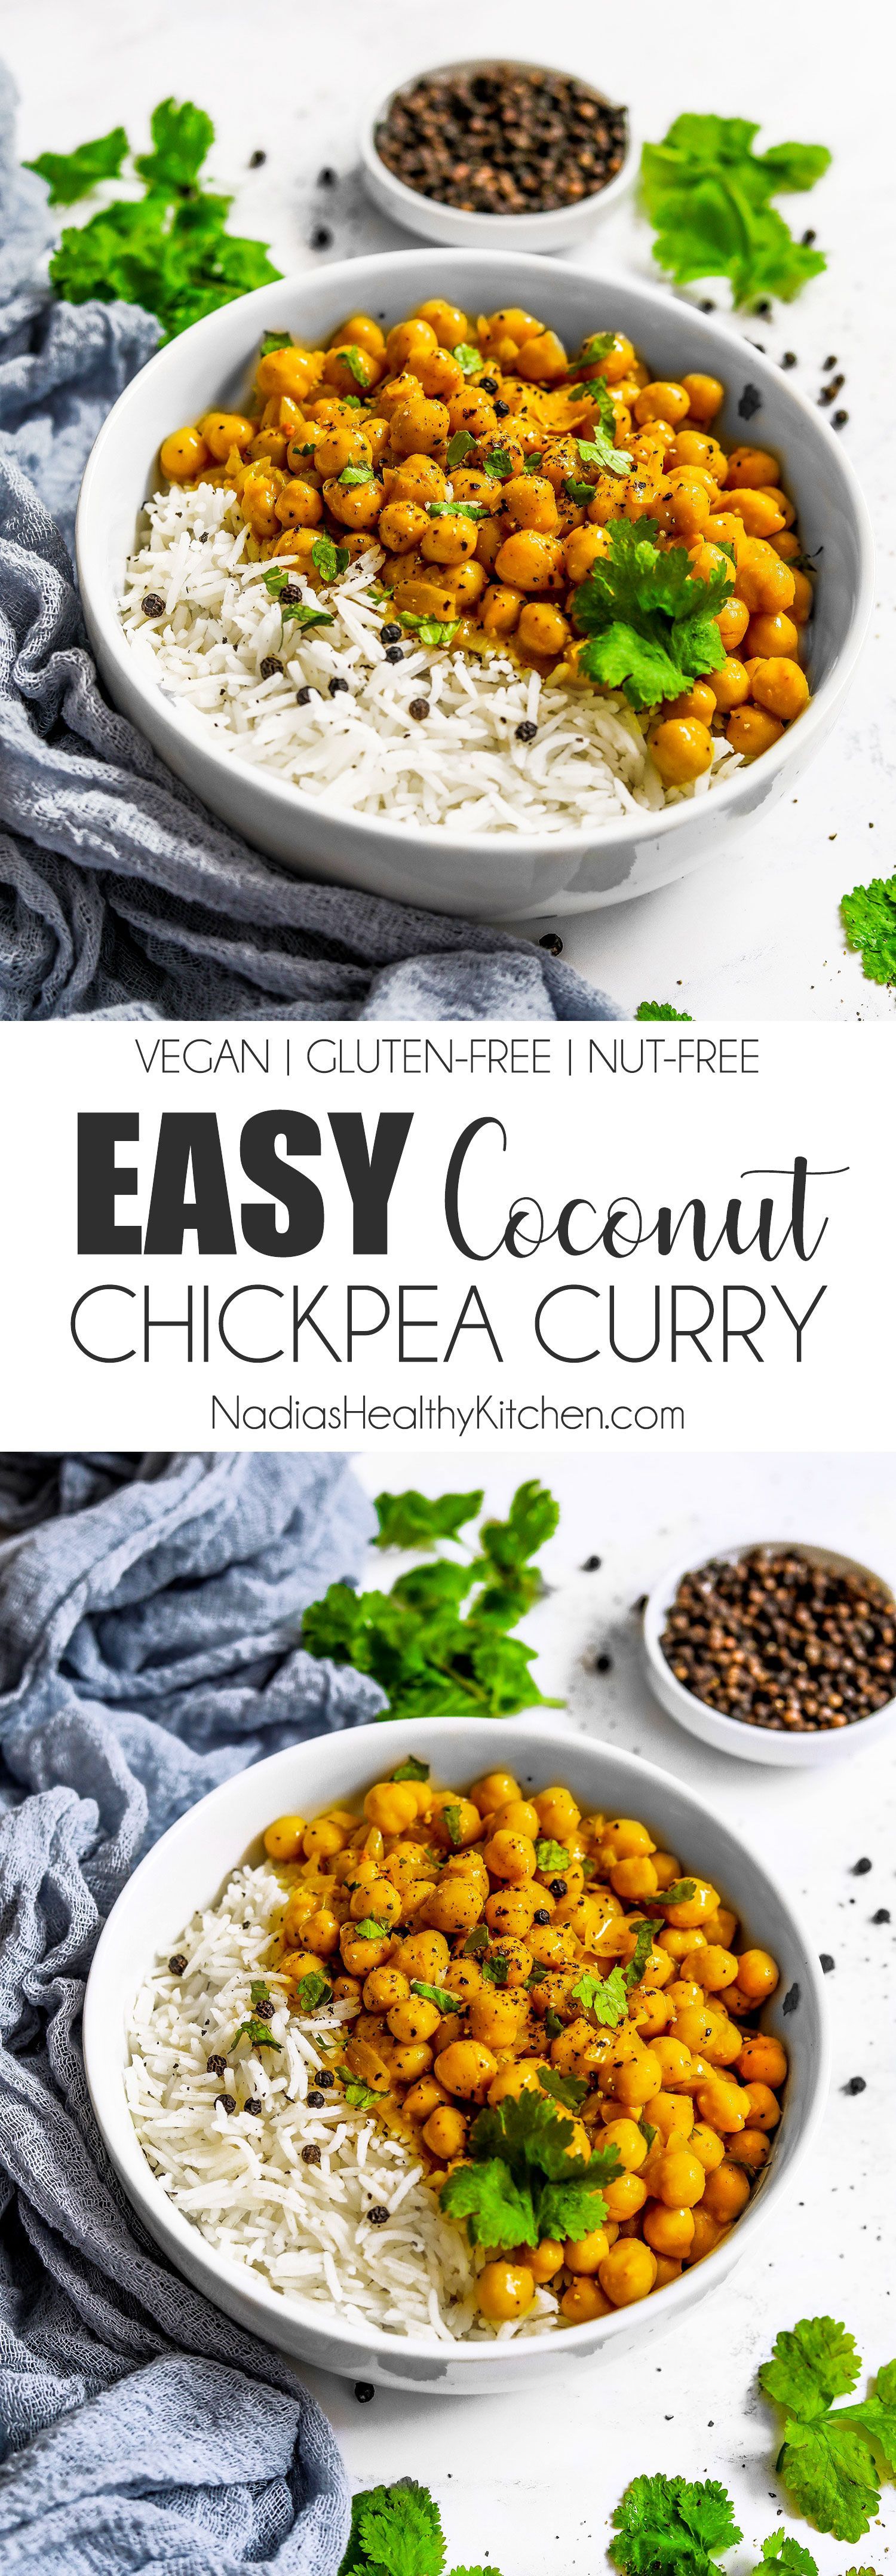 Easy Coconut Chickpea Curry -   11 healthy recipes Indian vegans ideas